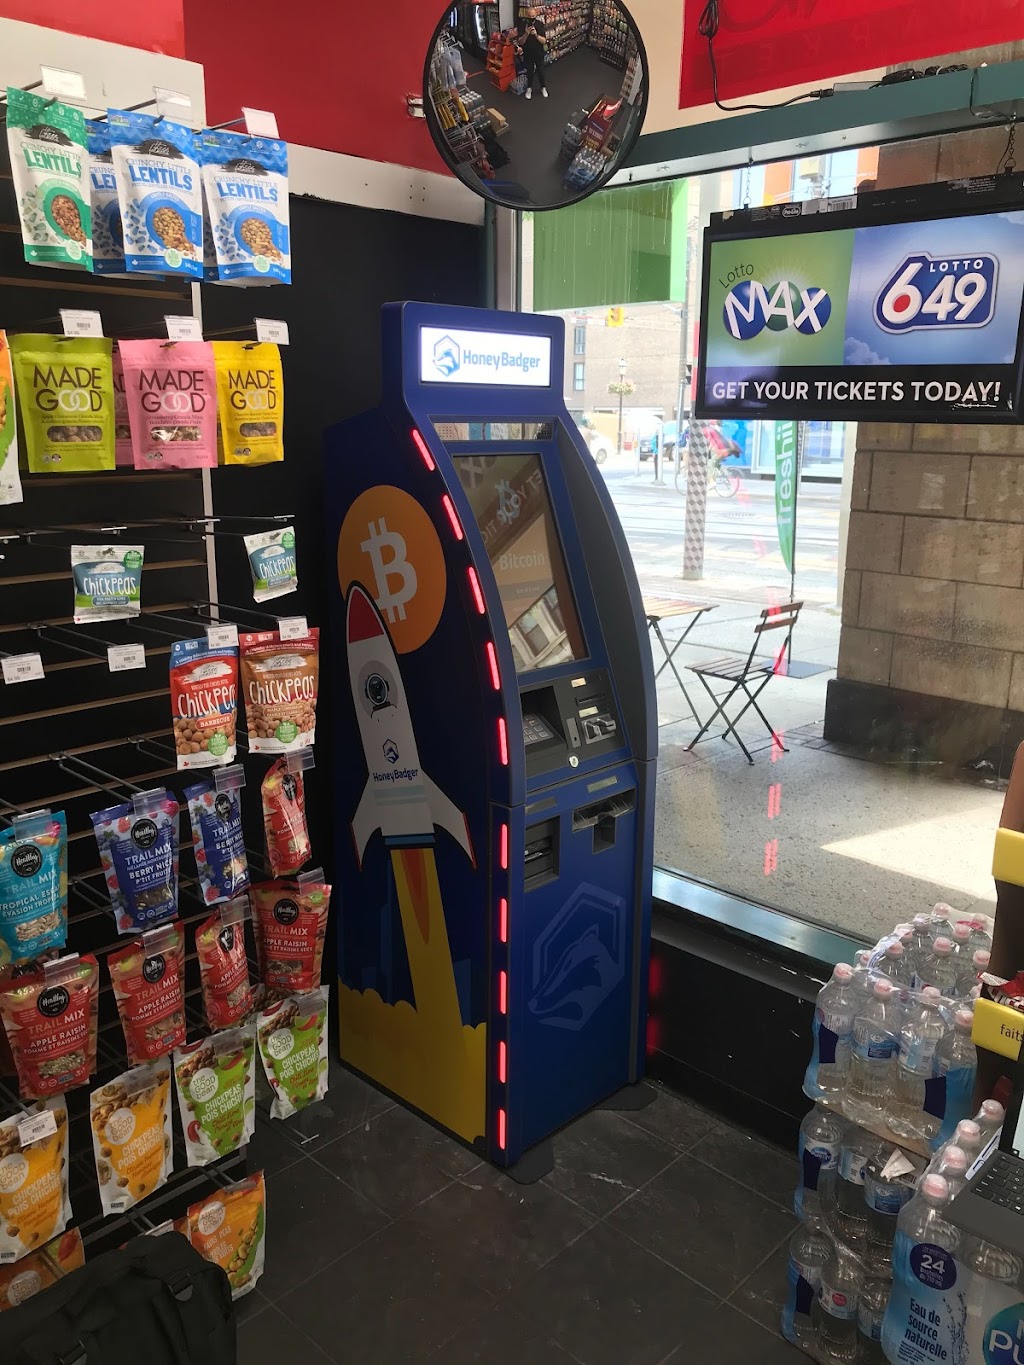 HoneyBadger Bitcoin ATM at INS Market King Street | 92 King St E, Toronto, ON M5C 2V8, Canada | Phone: (855) 499-1149